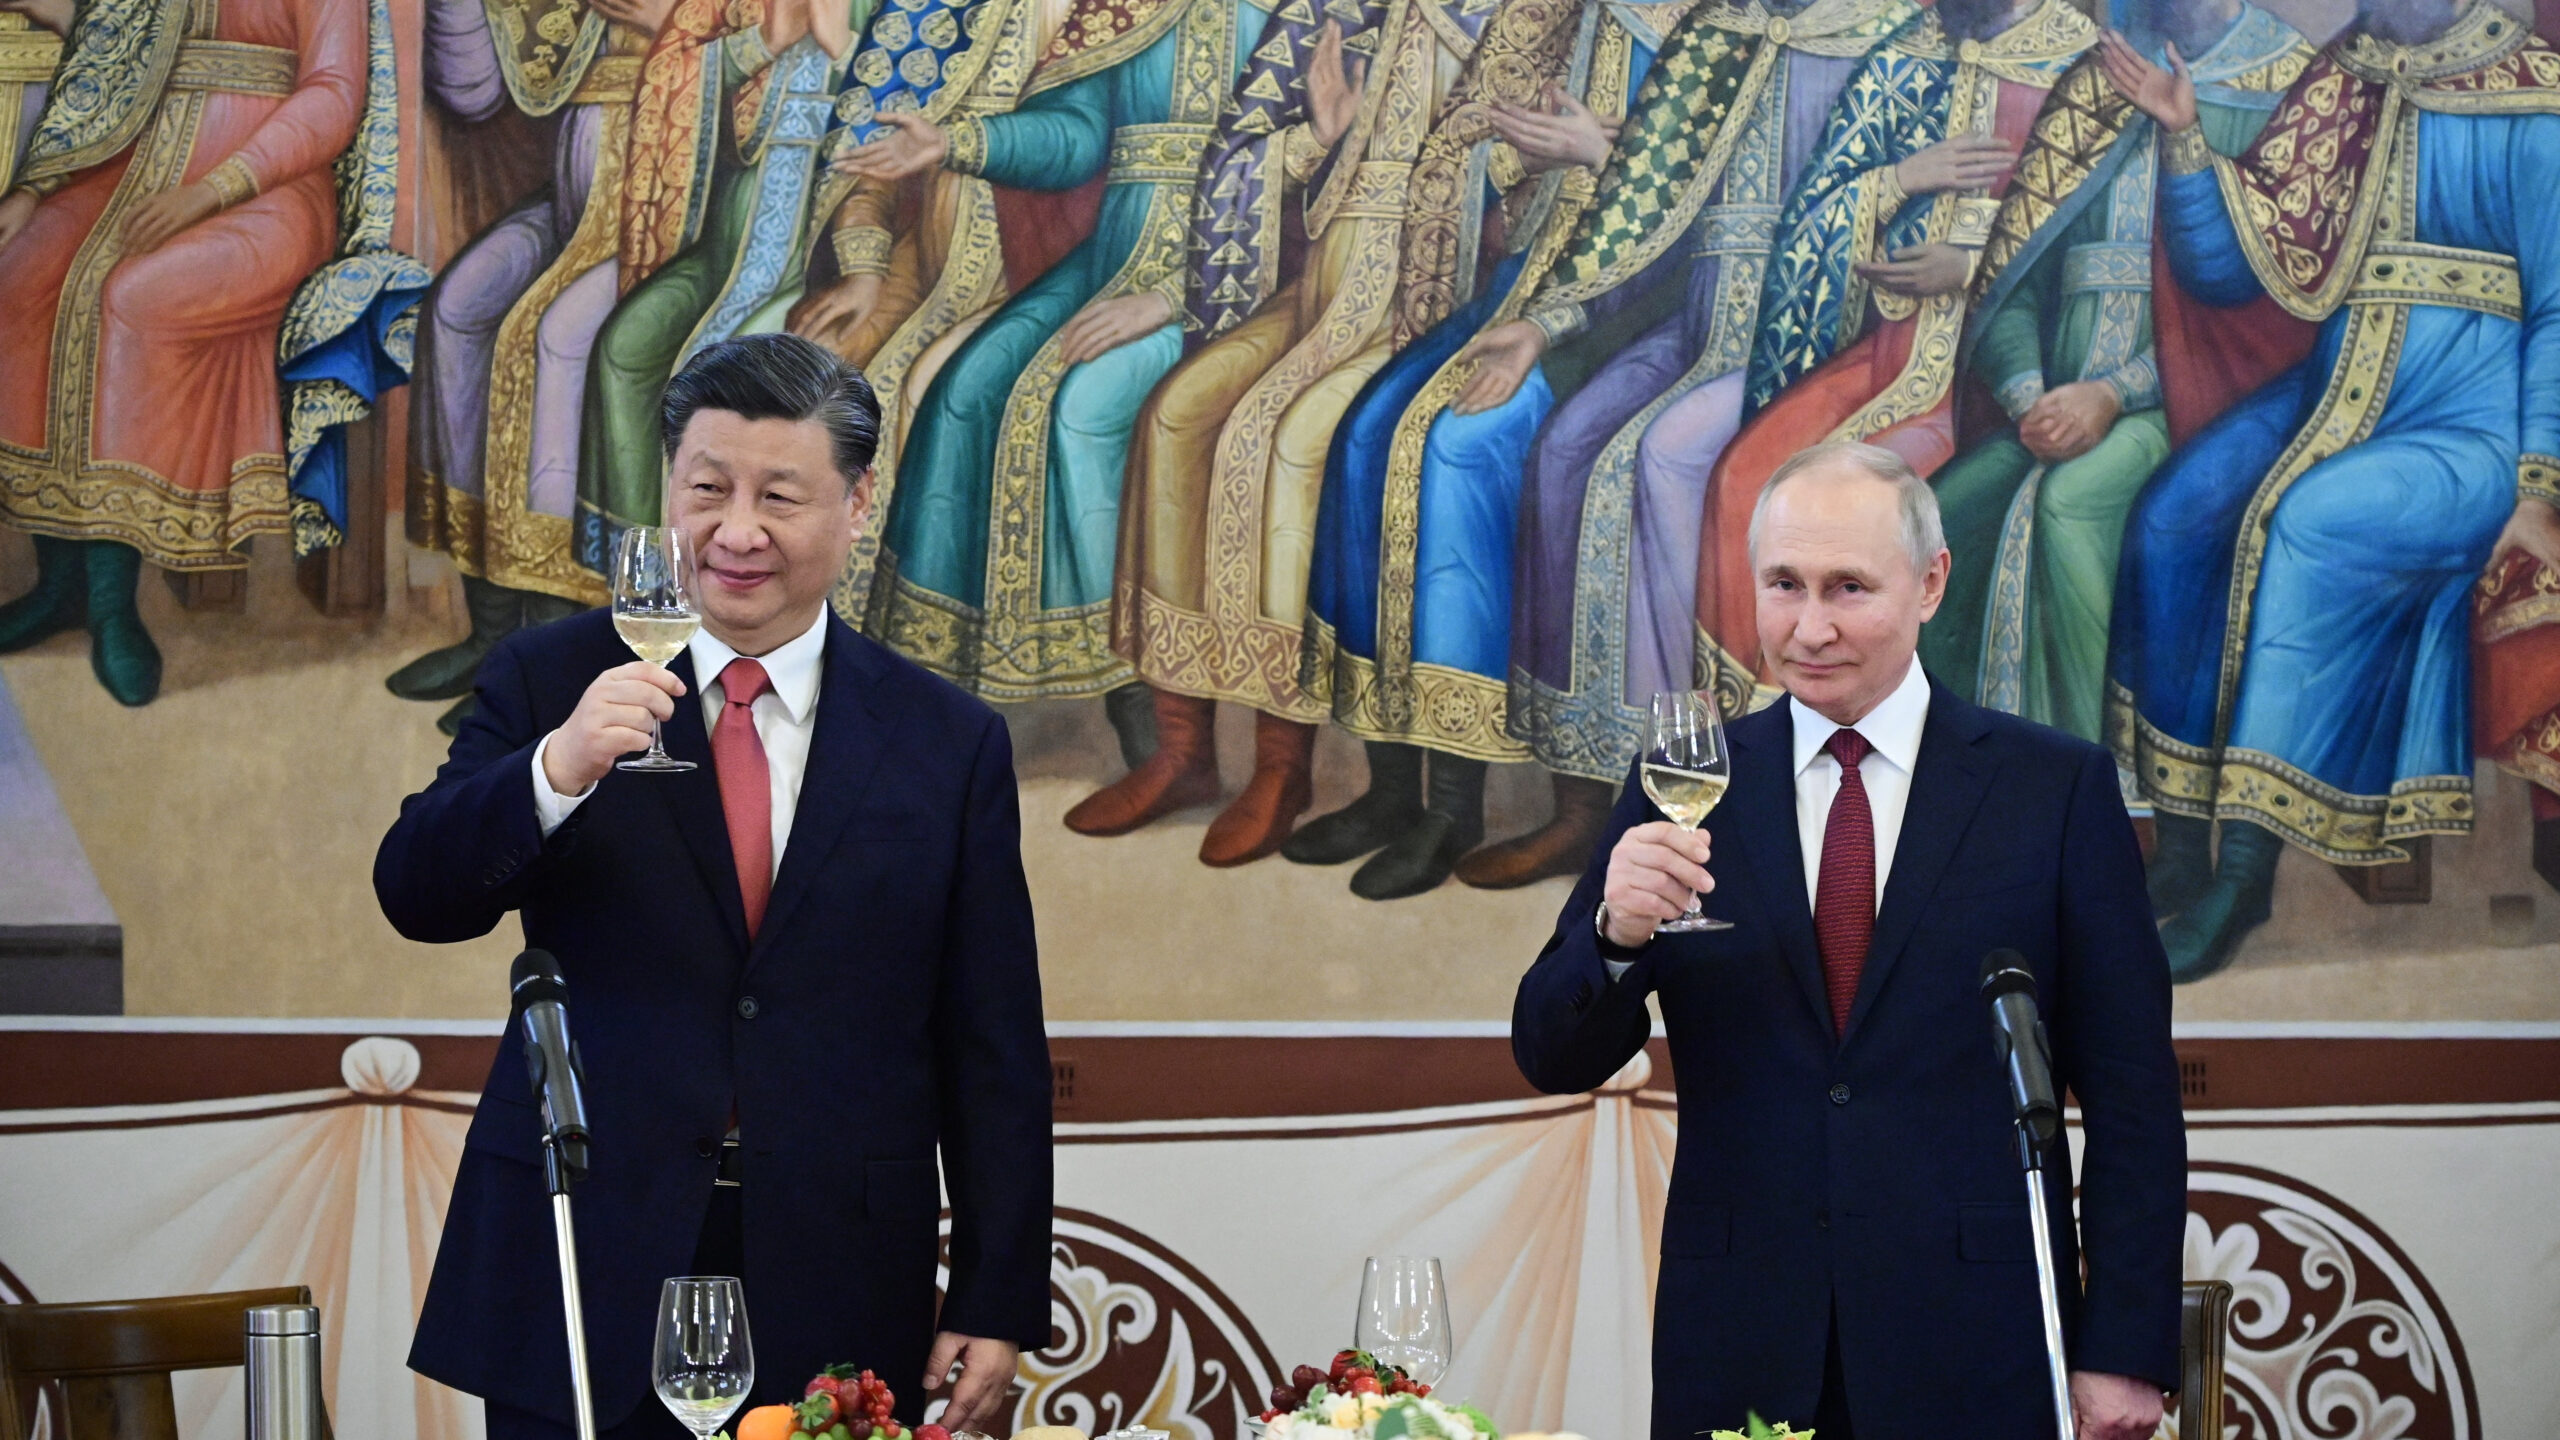 Russian President Vladimir Putin and China’s President Xi Jinping hold glasses during a reception following their talks at the Kremlin in Moscow on March 21, 2023. (Photo by Pavel Byrkin / SPUTNIK / AFP)